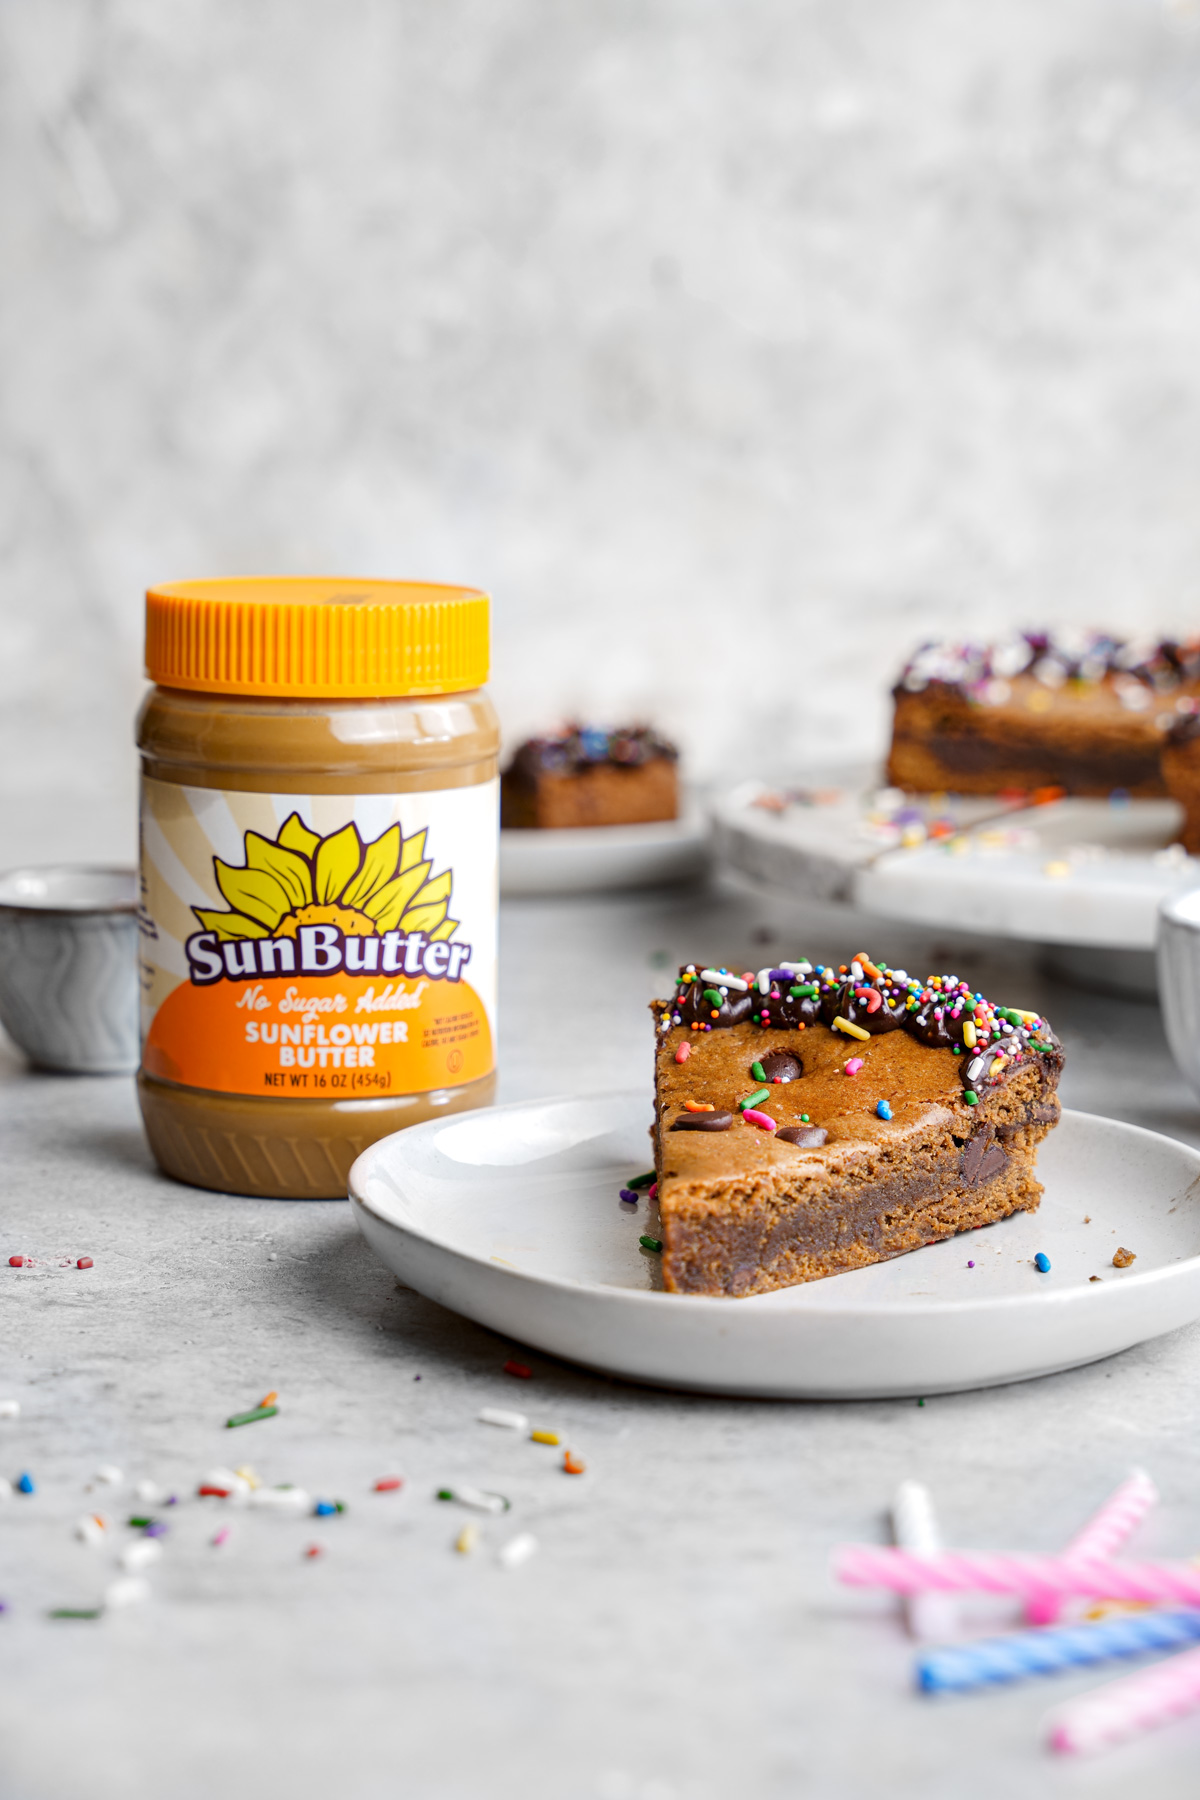 a slice of the cookie cake next to the sunbutter no sugar added sunflower butter